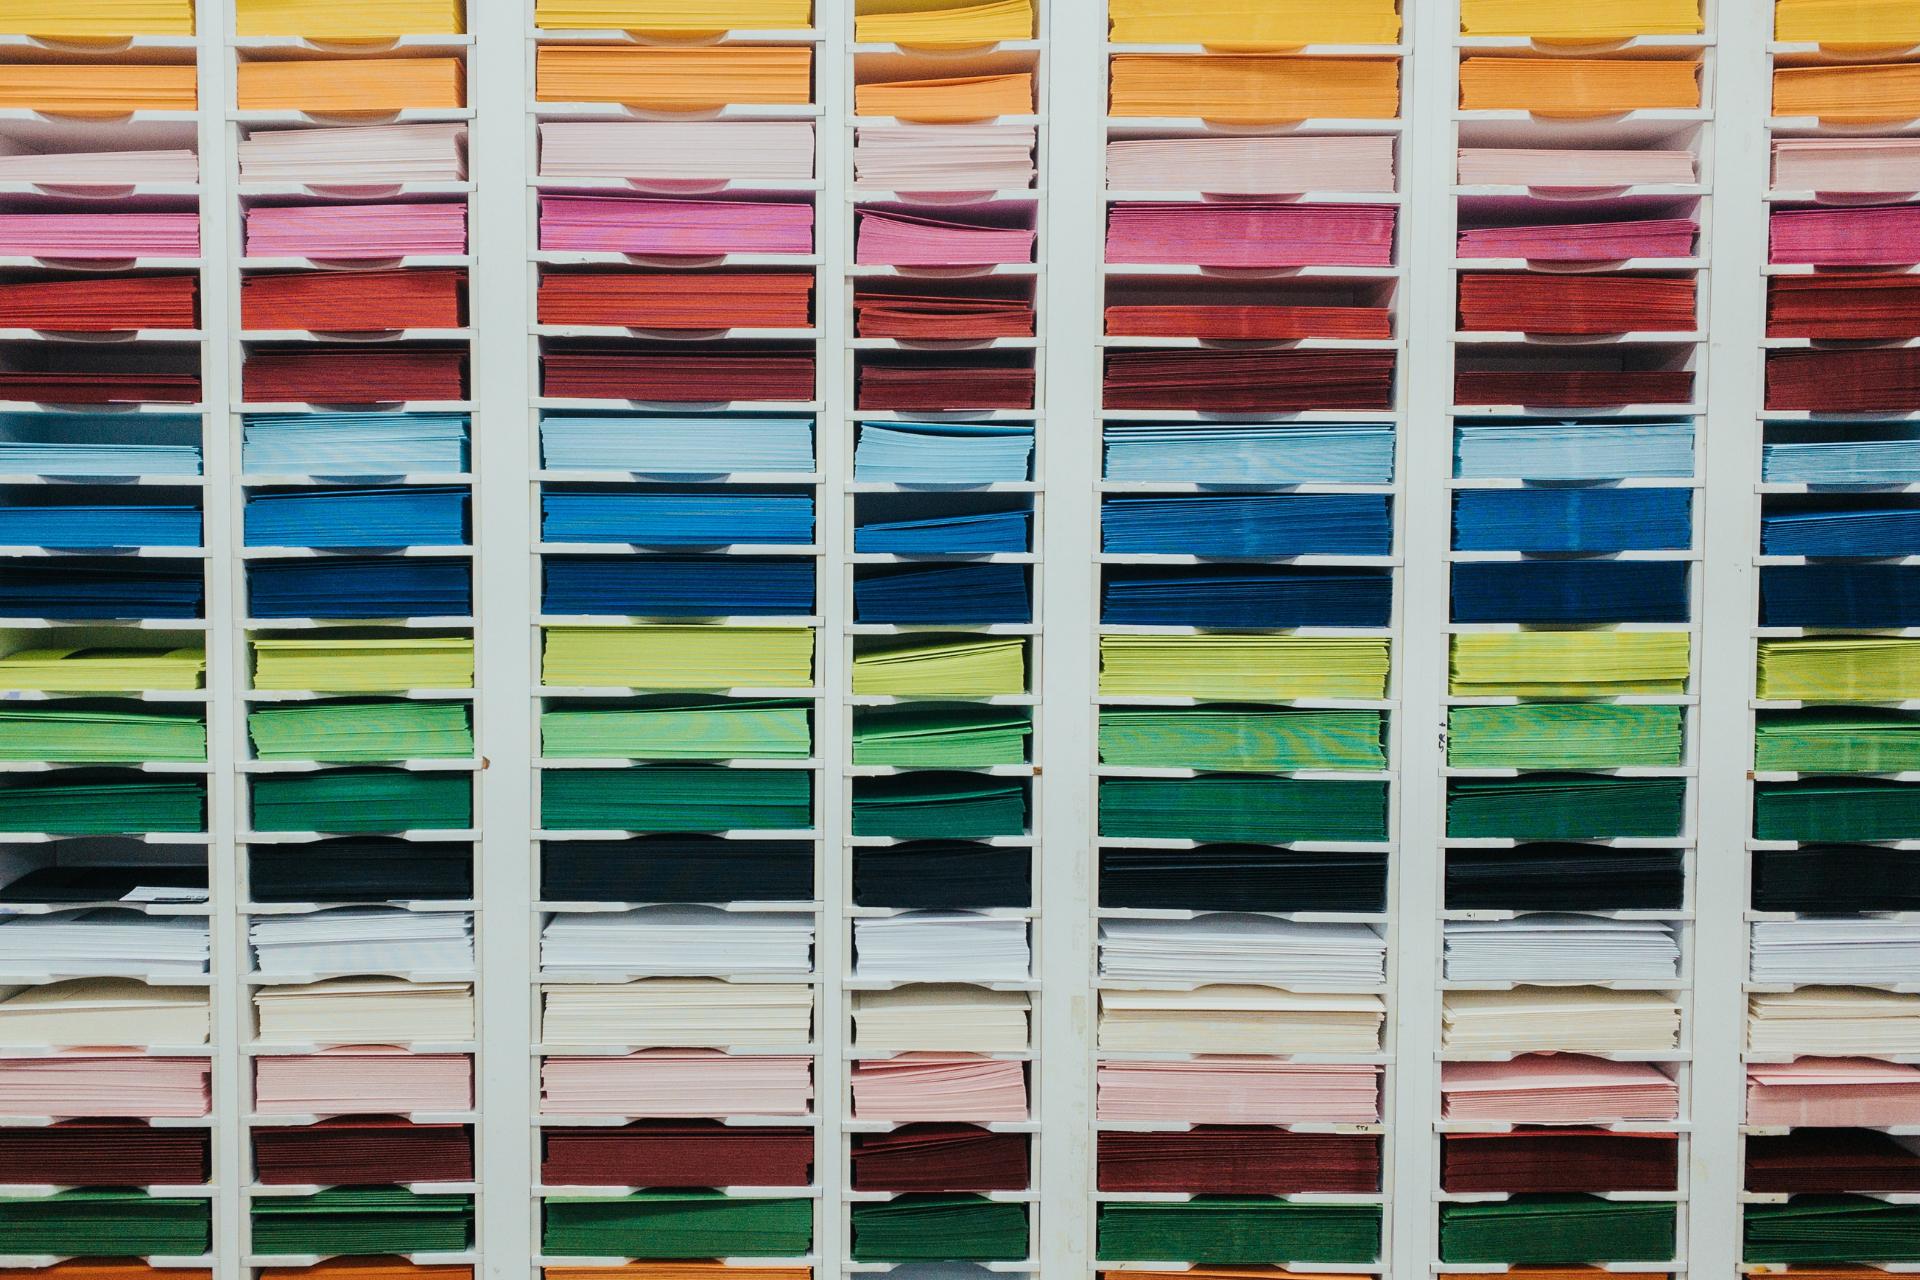 Colors neatly organized